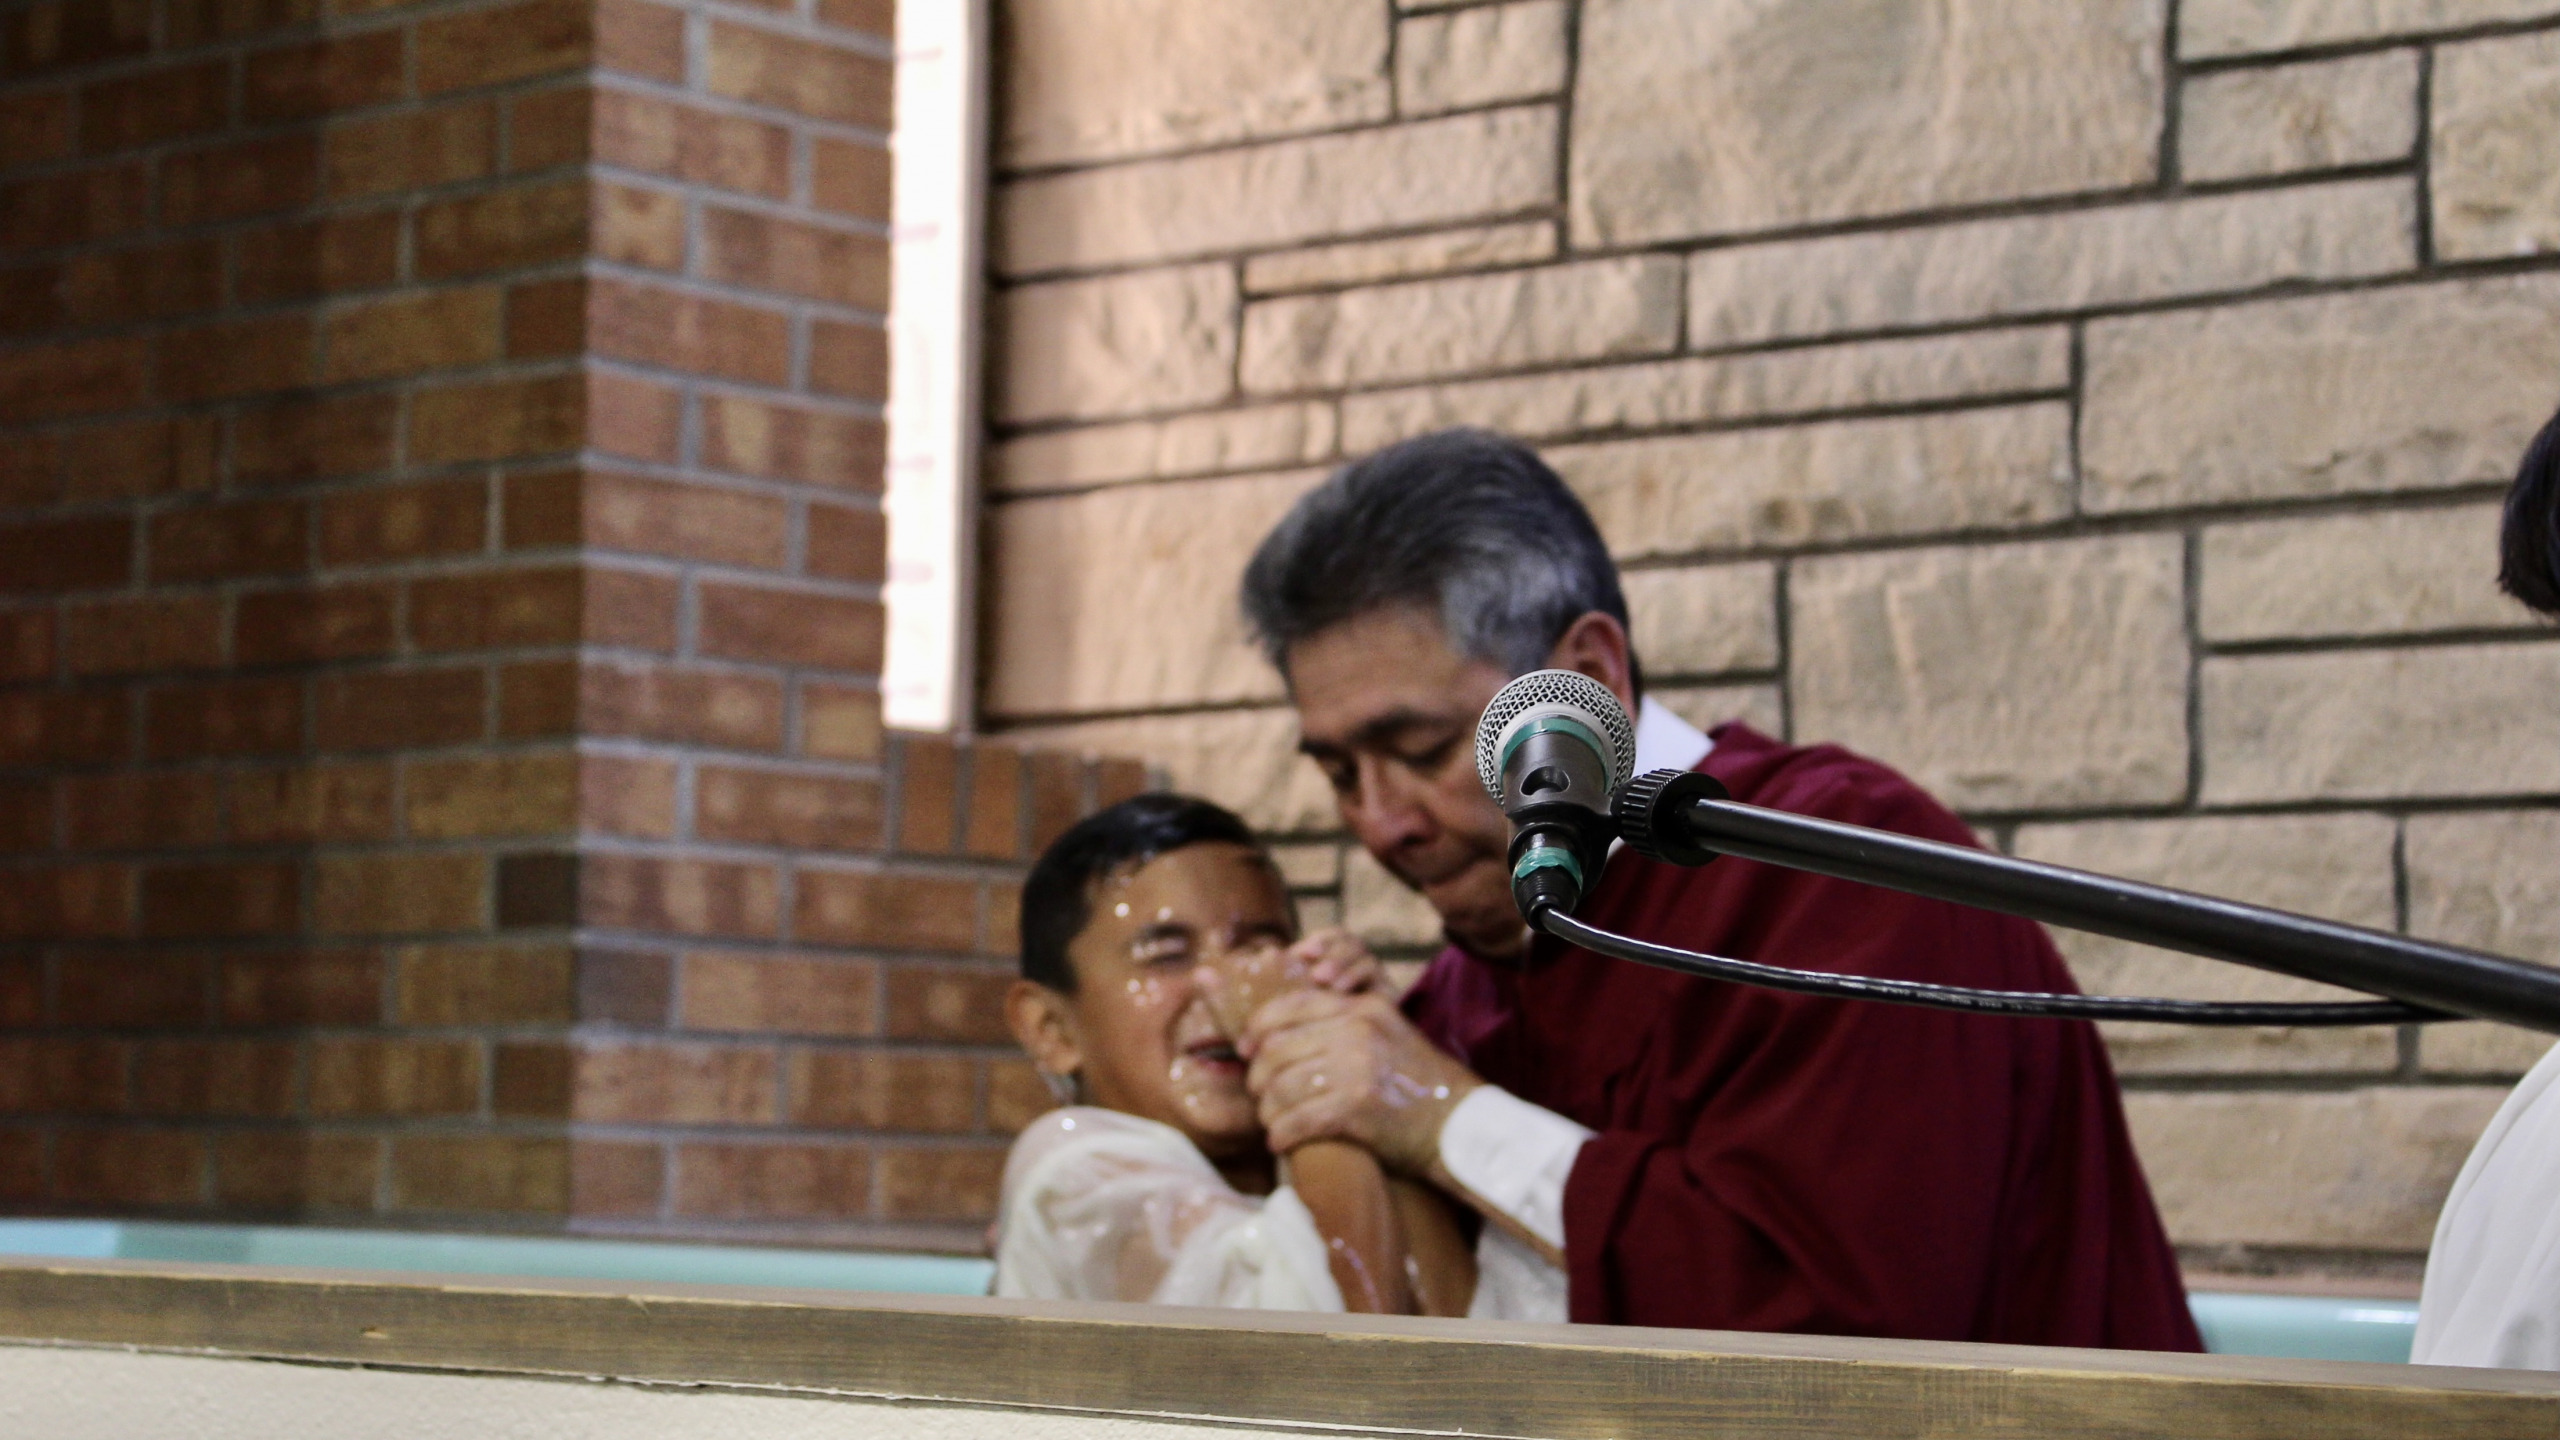 Montrose Hispanic ends community meetings with 11 baptisms